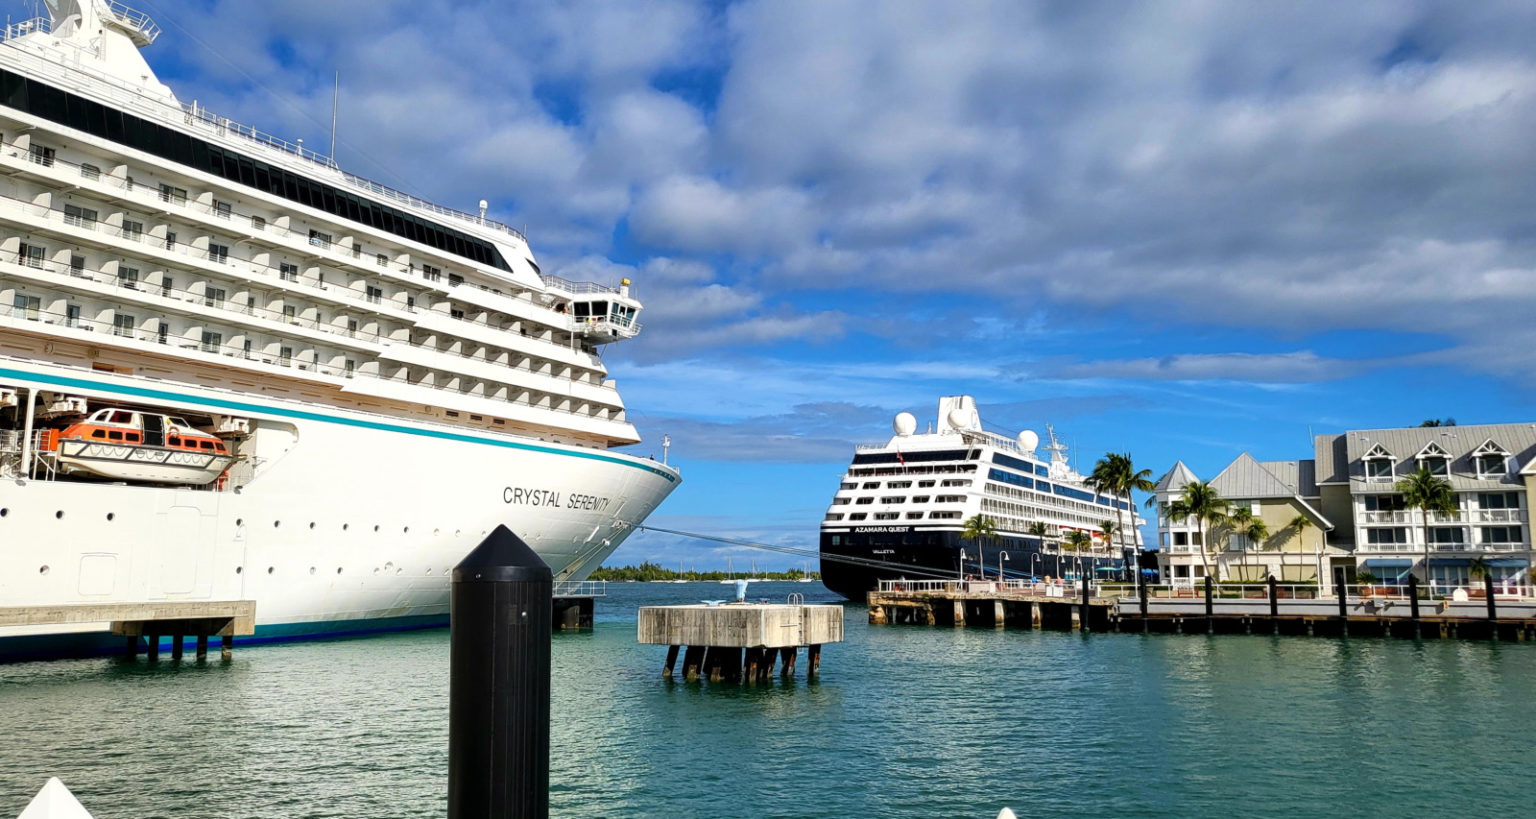 CRUISE SHIPS CAN COME TO KEY WEST